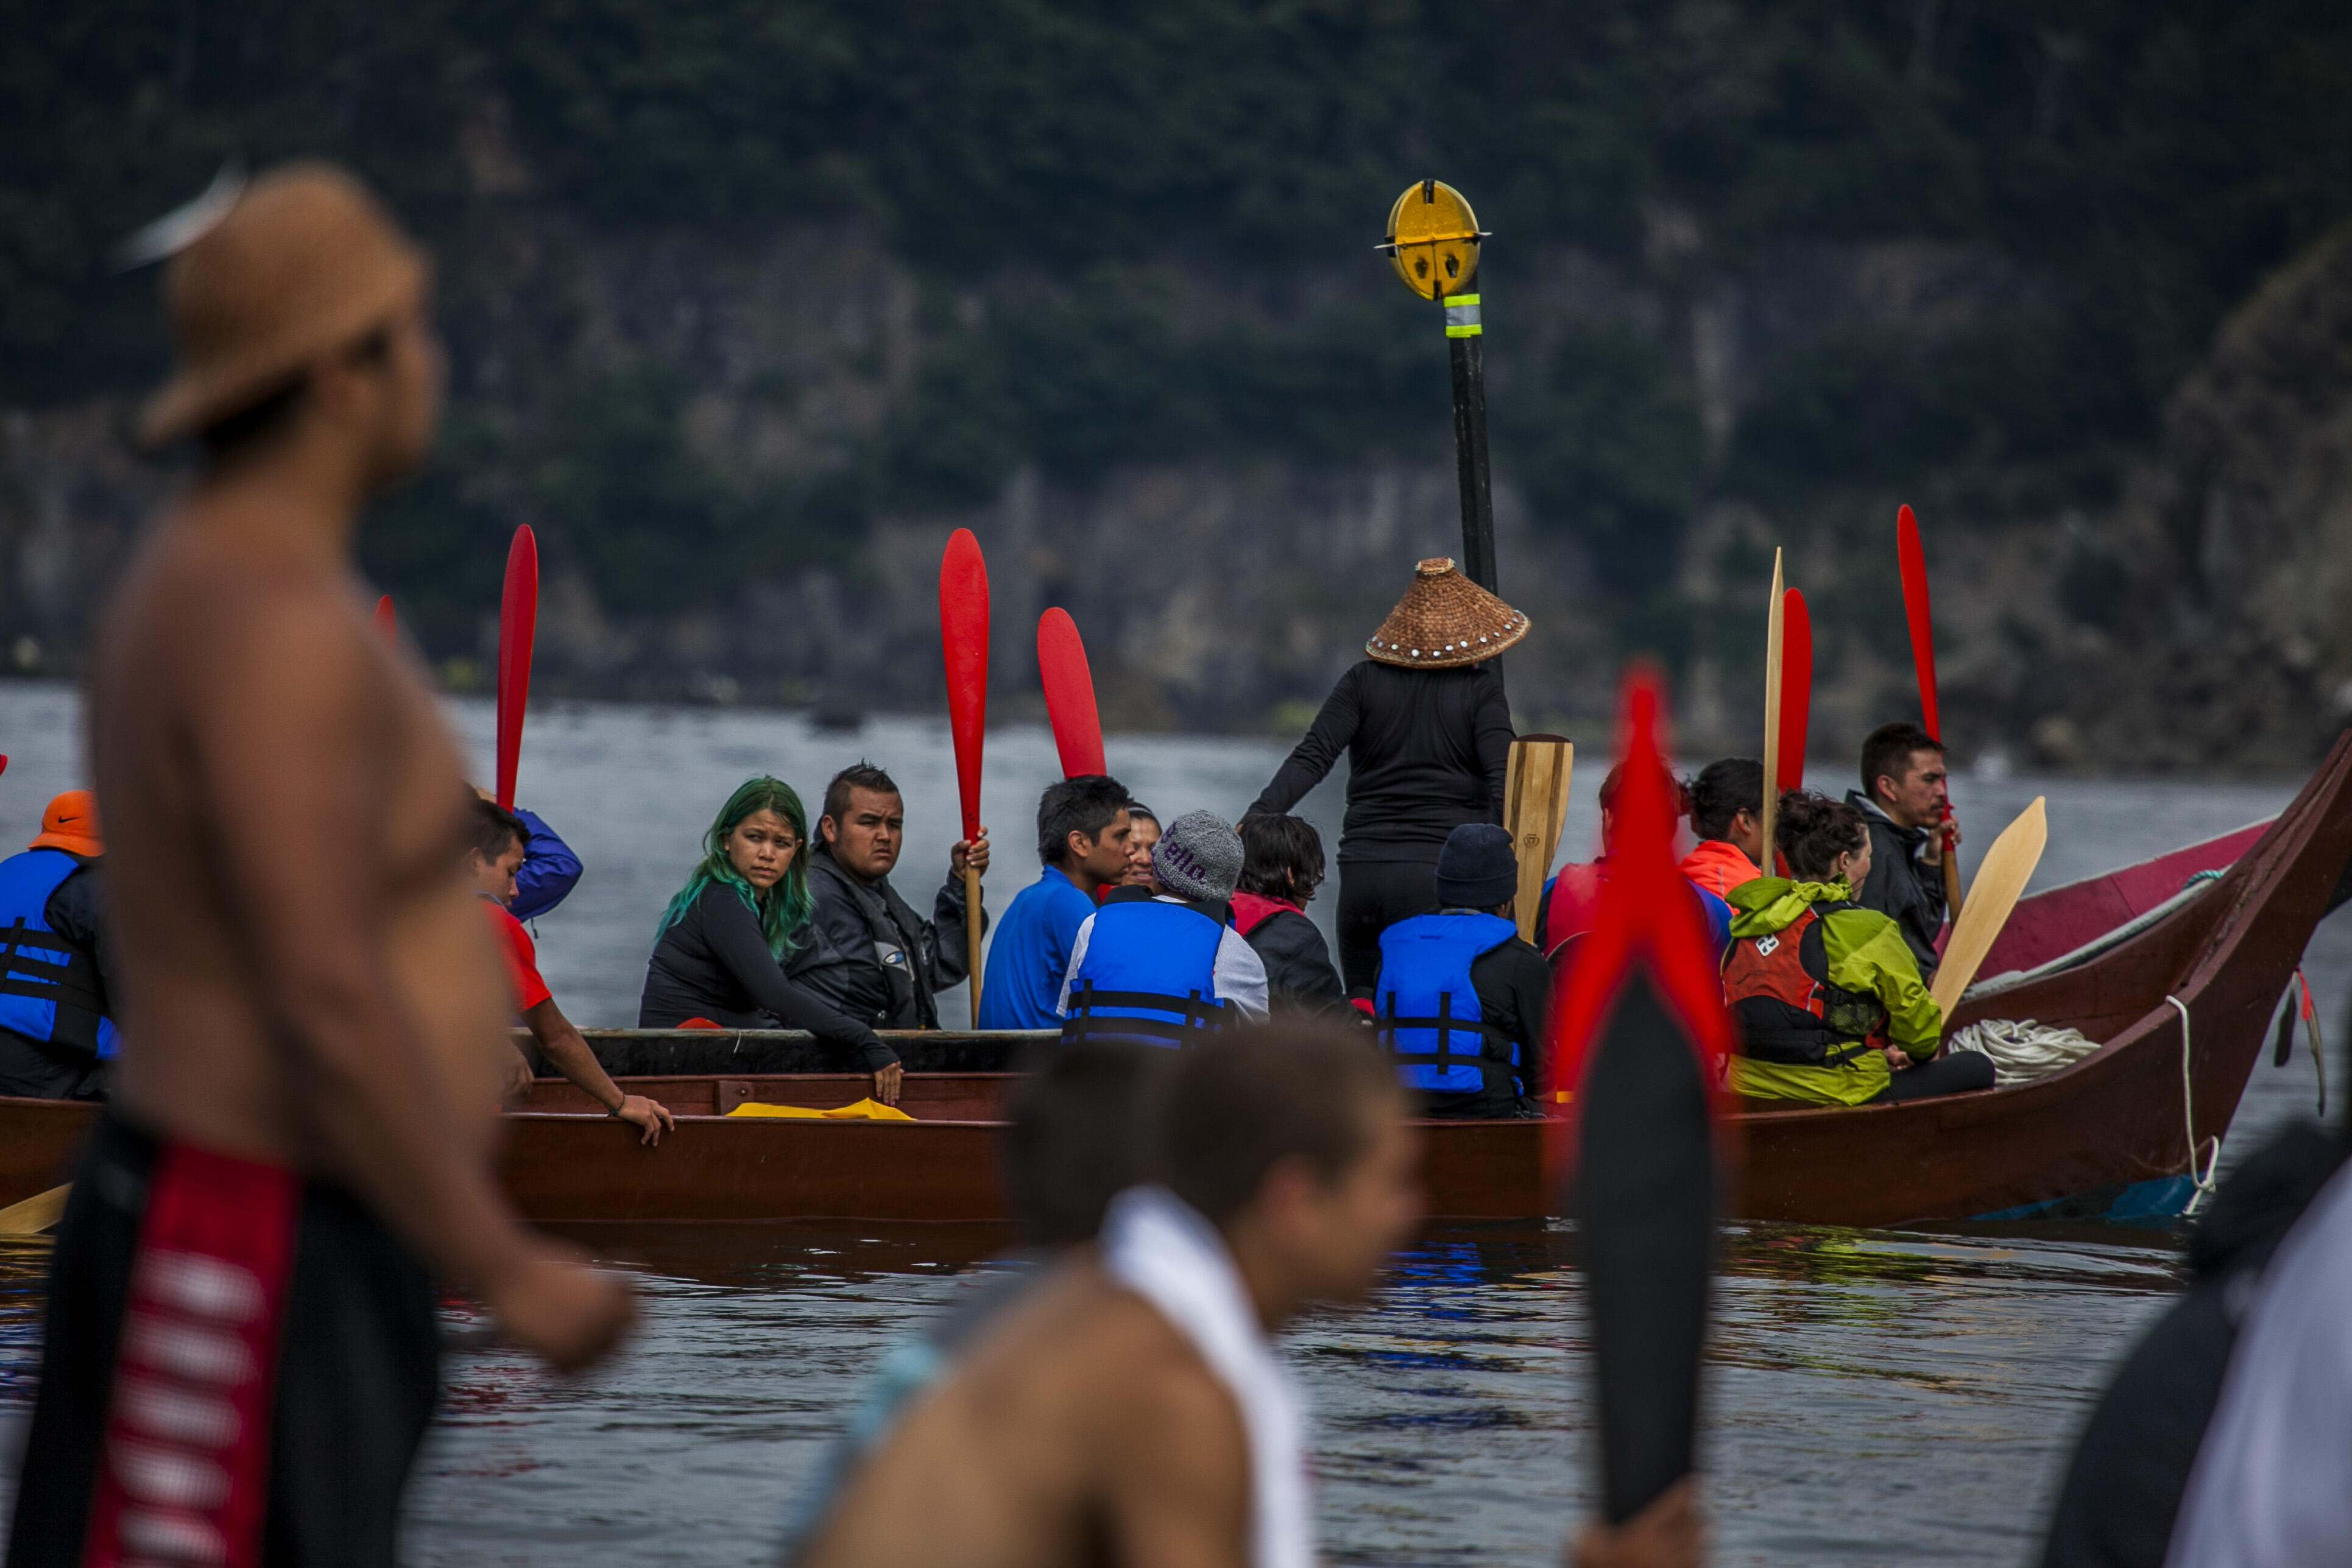 Families from around the Pacific Northwest gather in canoes to travel to Point Grenville on the Quinalt Reservation.